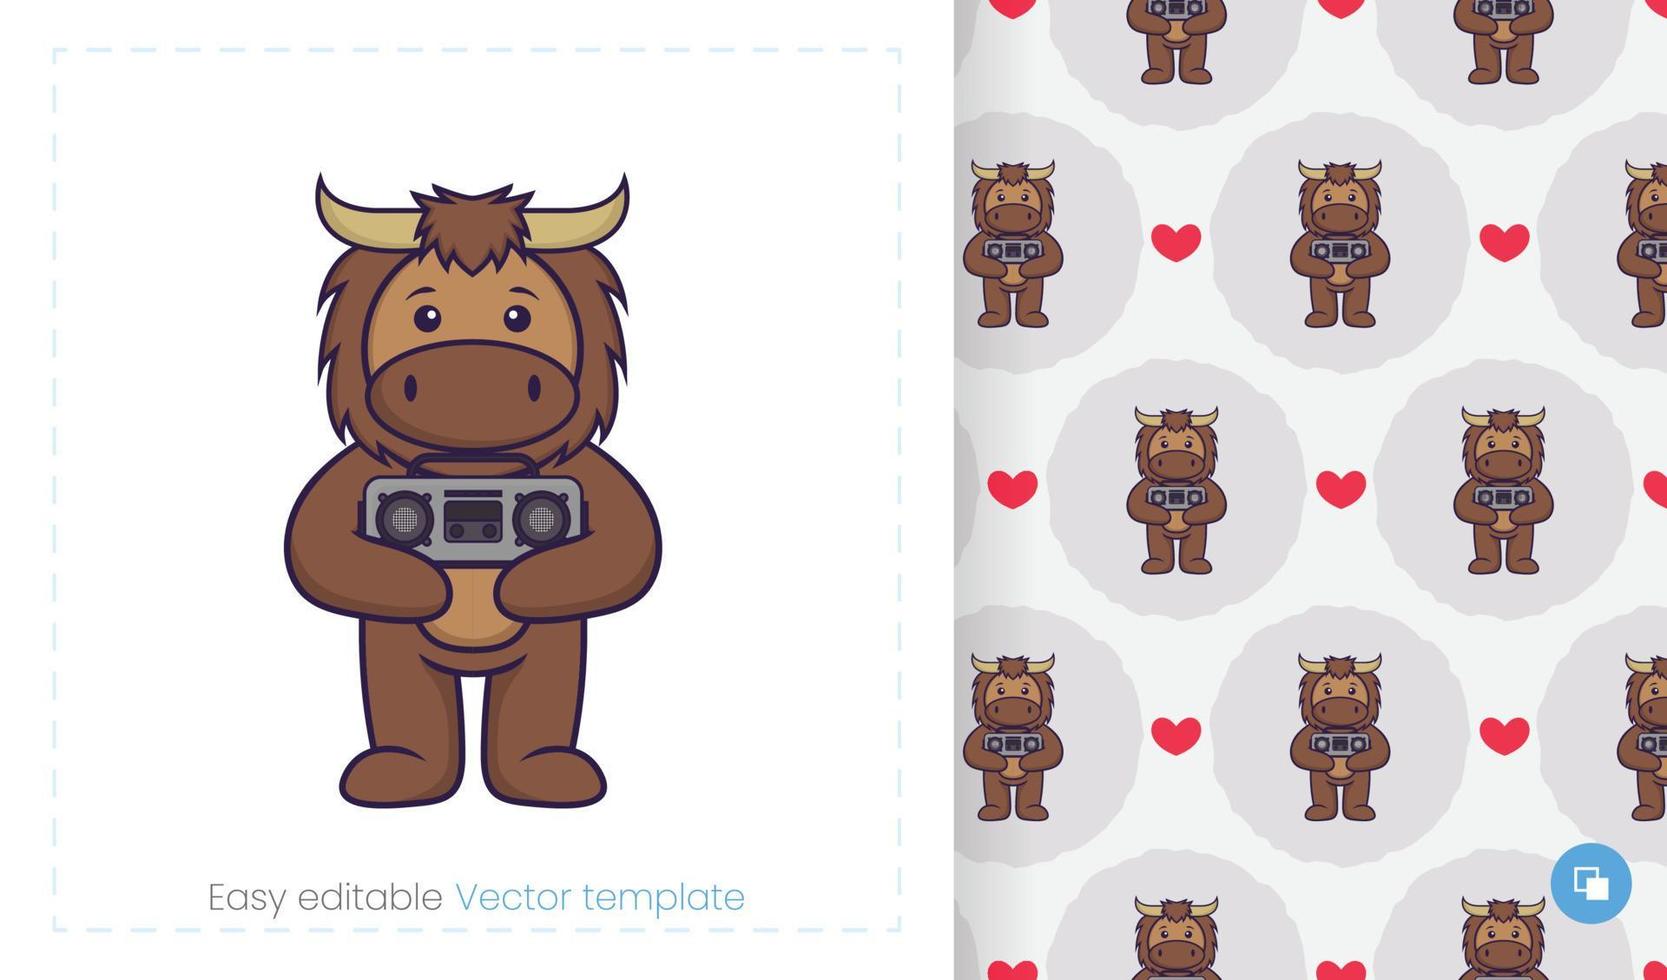 Cute bull mascot character. Can be used on stickers, patches, textiles, paper, cloth and others. vector